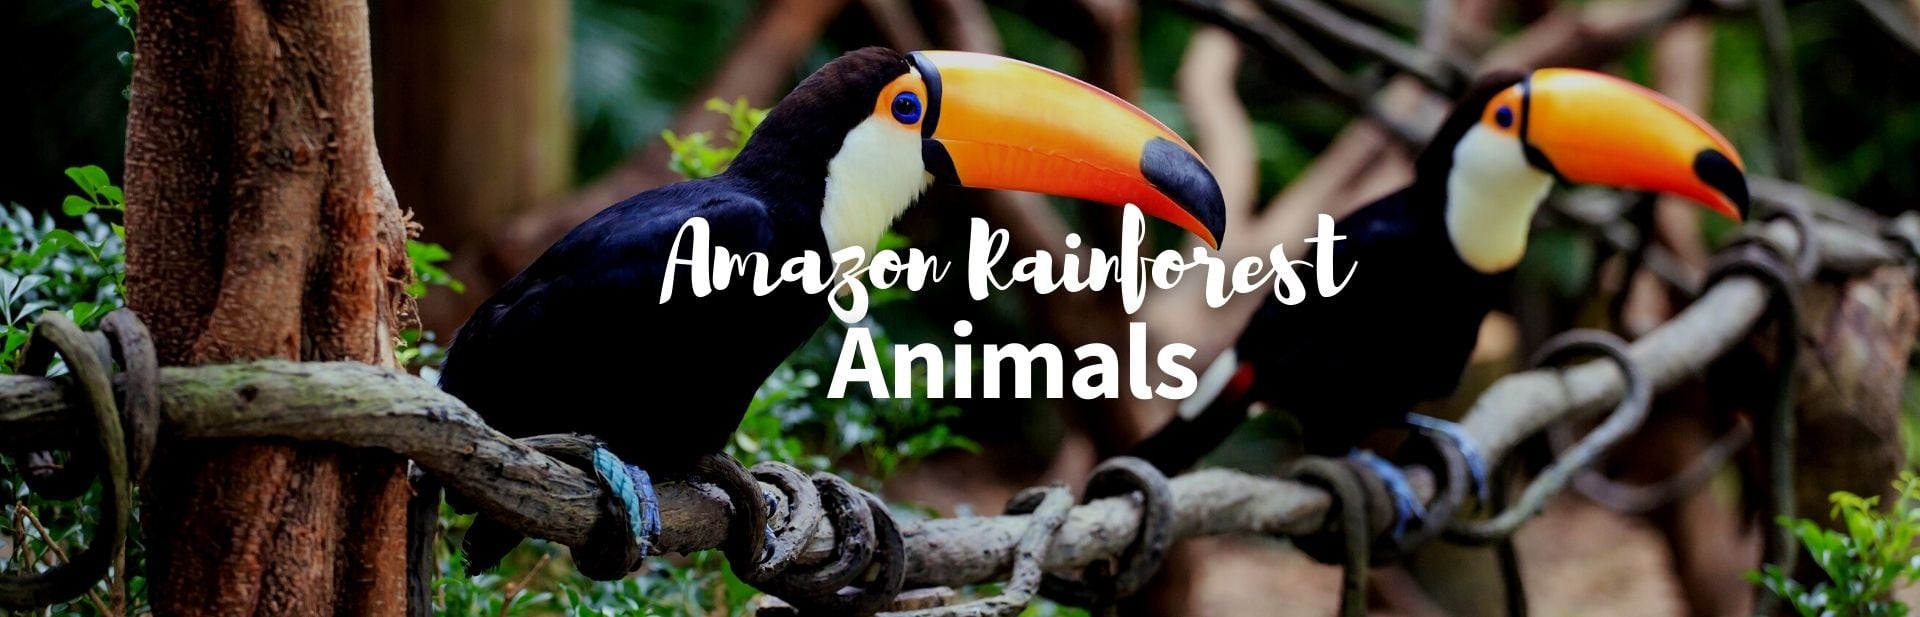 39 Fascinating Amazon Rainforest Animals, Birds & Insects